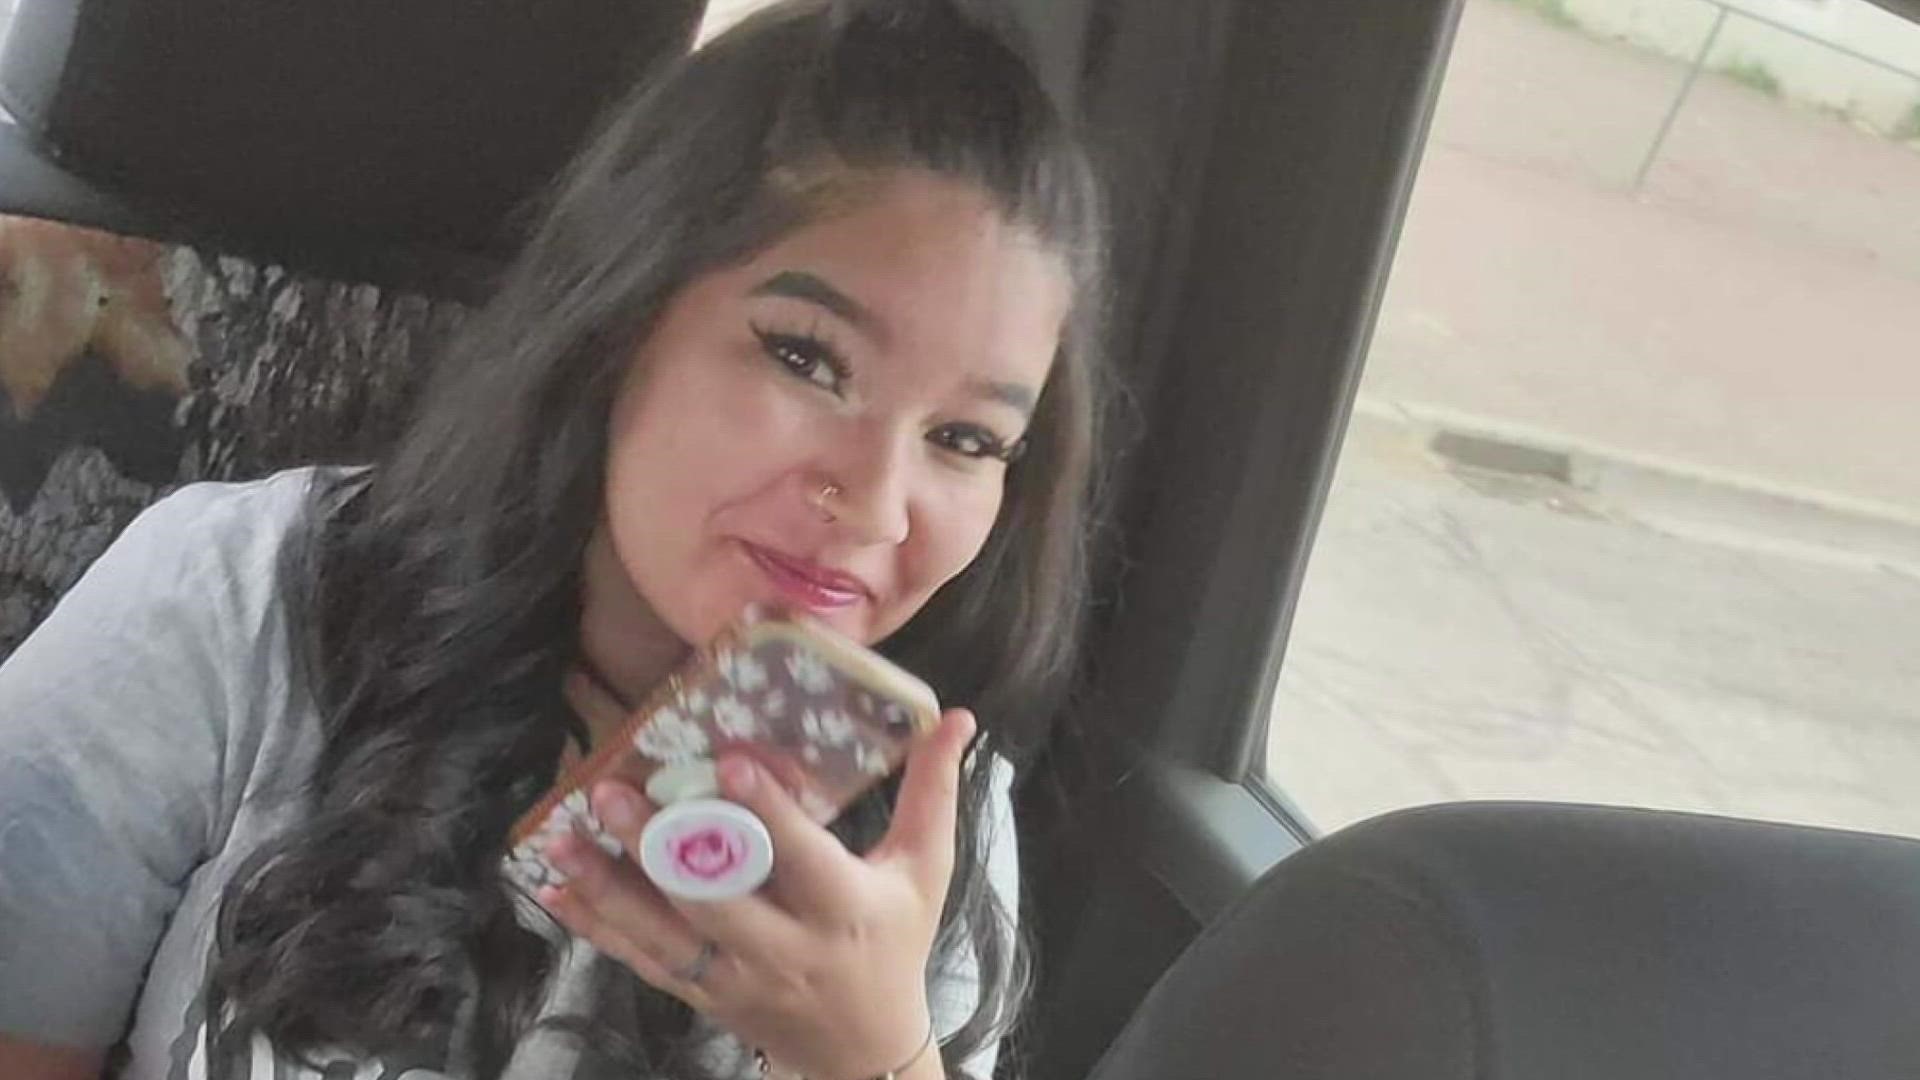 Two young people are facing charges in connection with the death of 14-year-old Aaliyah Salazar in Monte Vista. Her family hopes the new DA hears their plea.